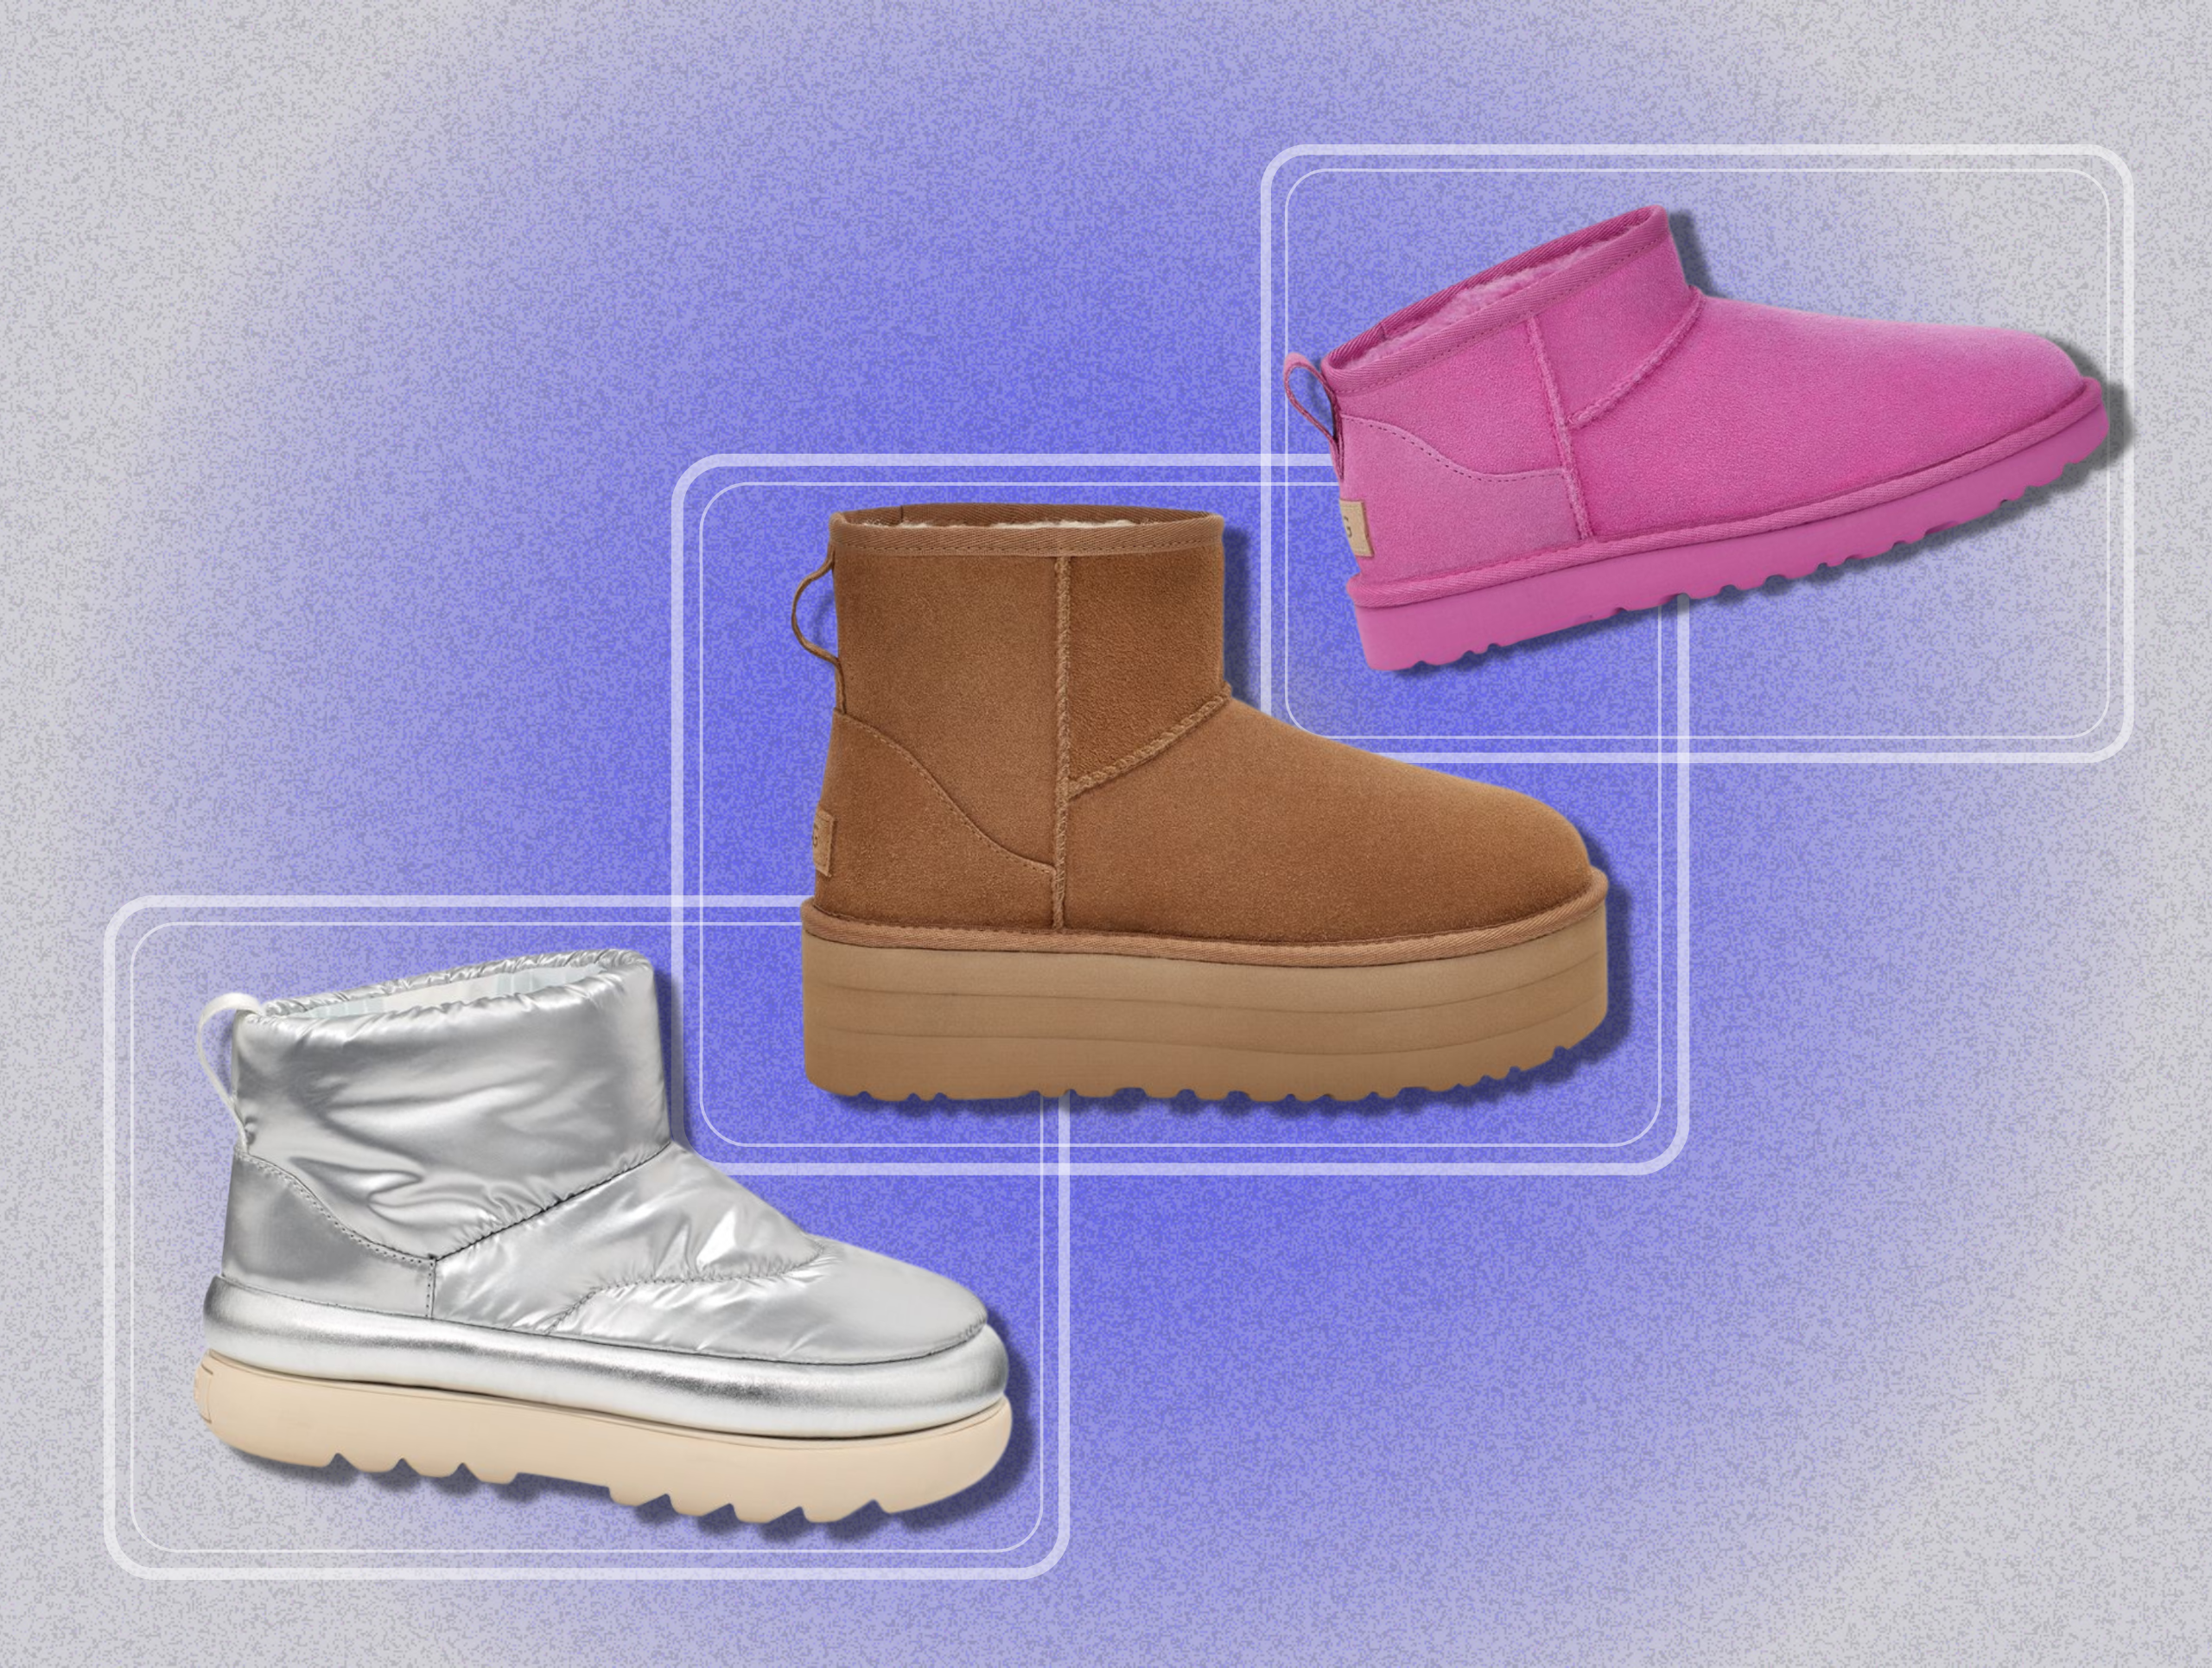 Platform Uggs Are The Major Fall Footwear Trend To Shop Right Now